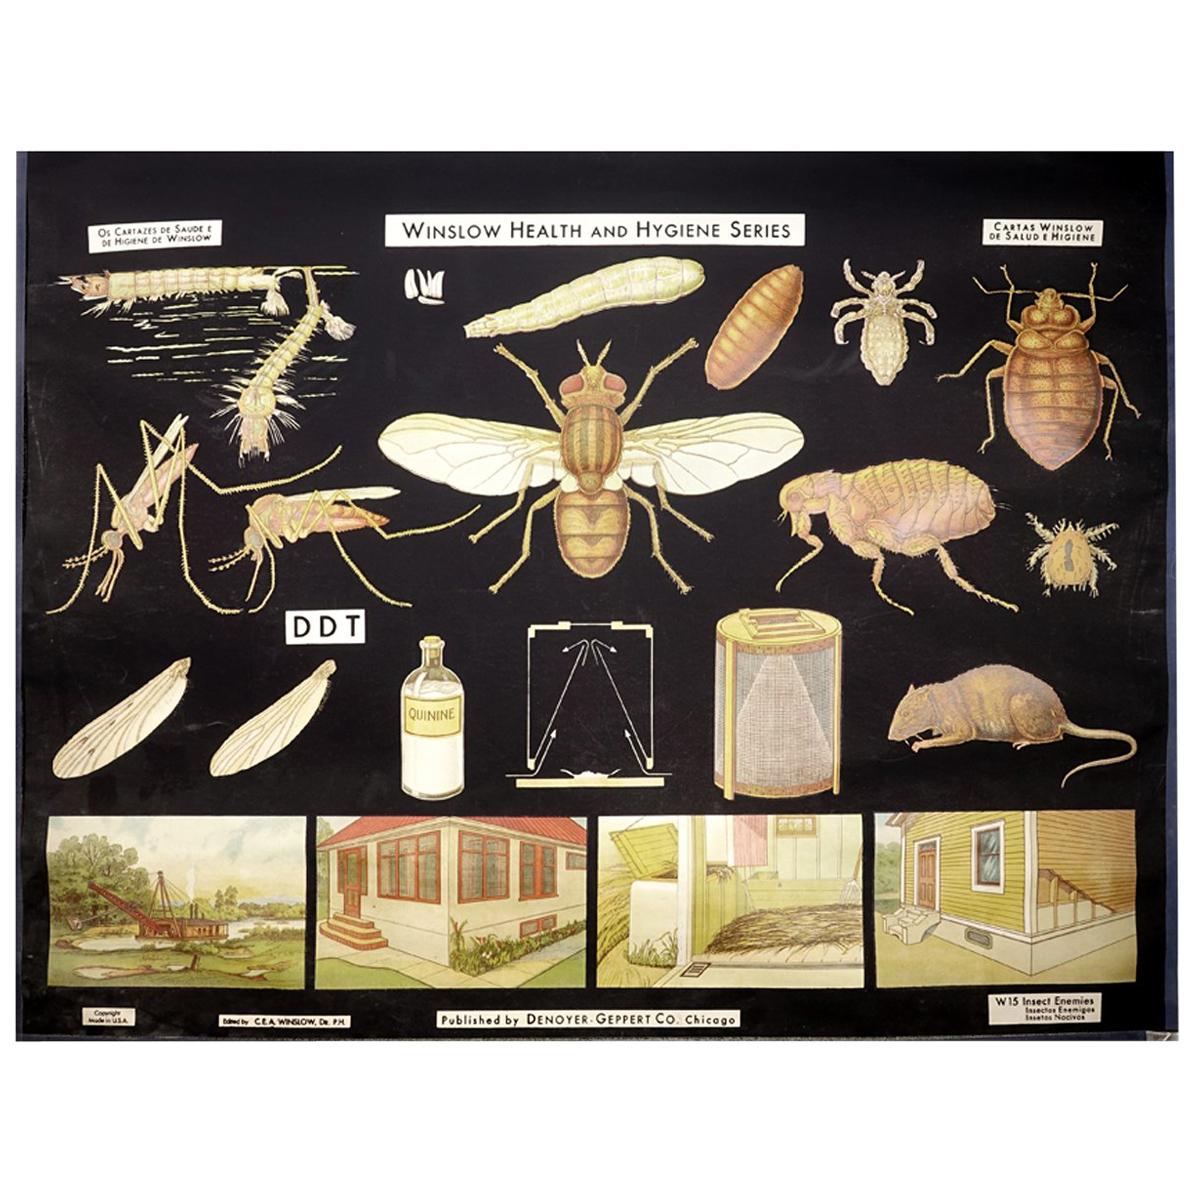 Winslow Health and Hygiene Poster, Insect Enemies